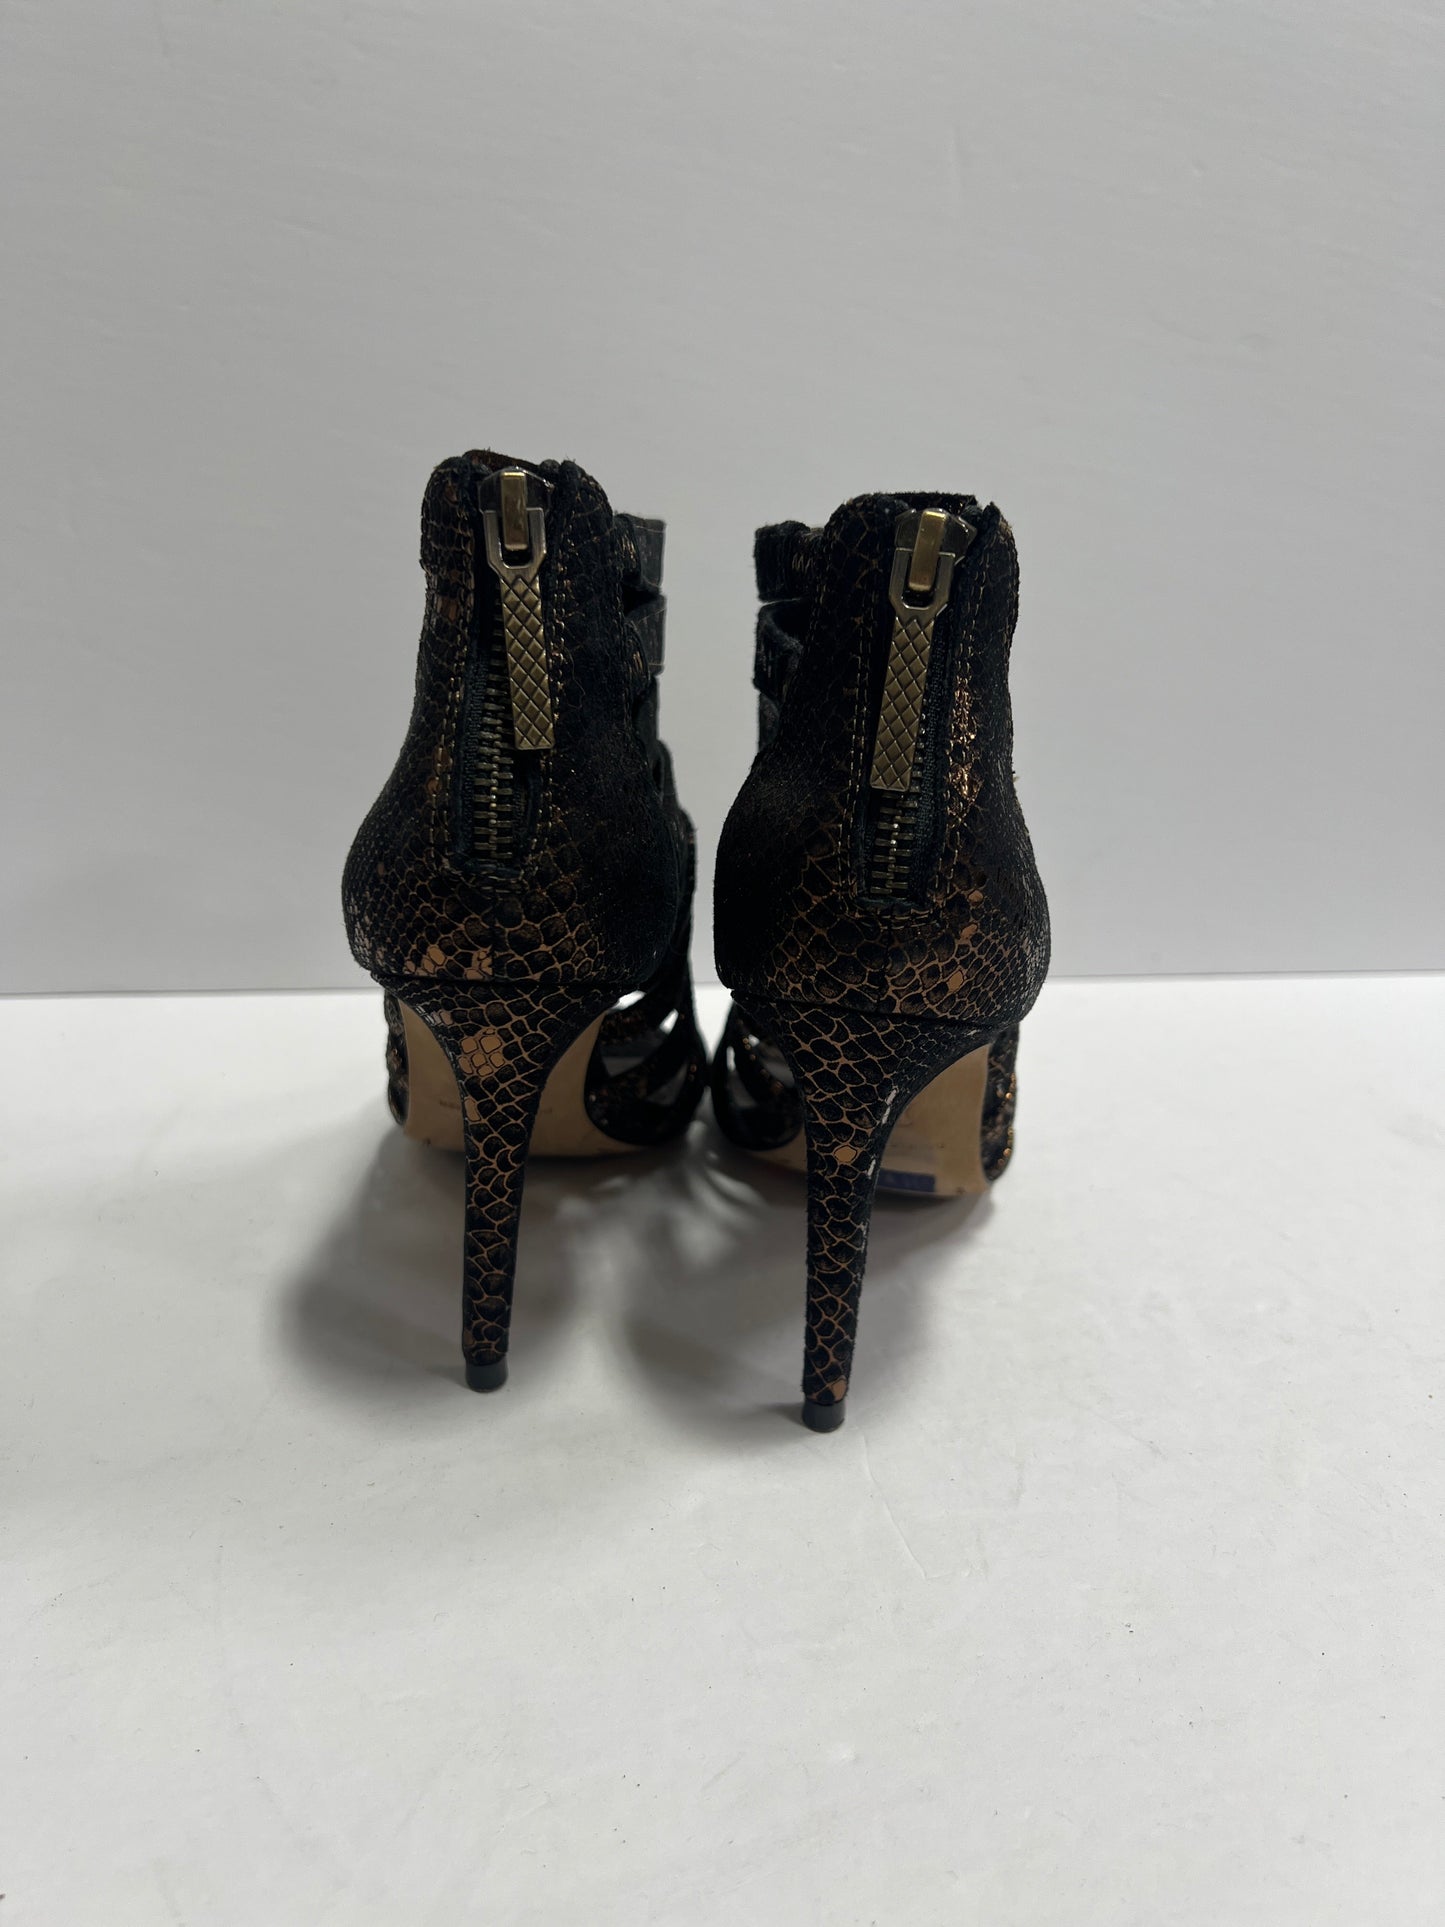 Shoes Heels Stiletto By Donald Pliner  Size: 5